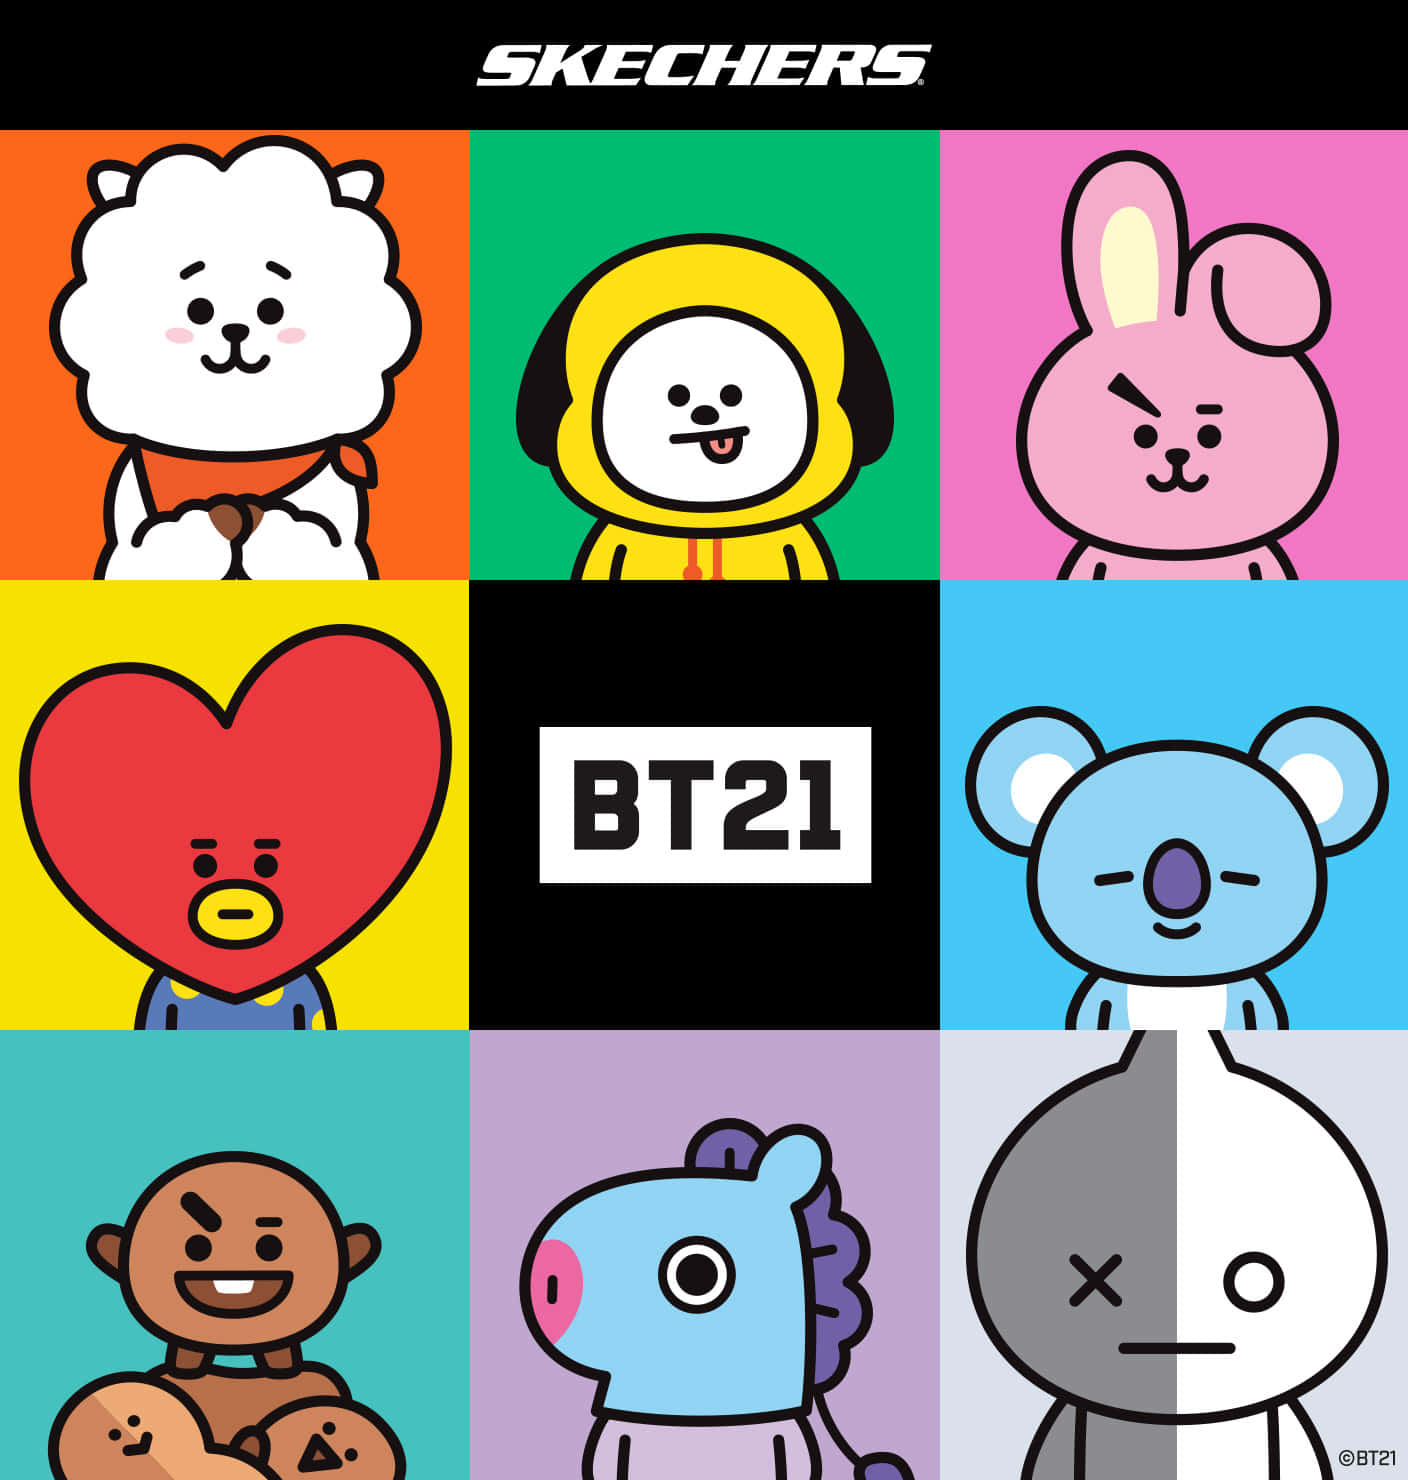 Get your BT21 swag today!